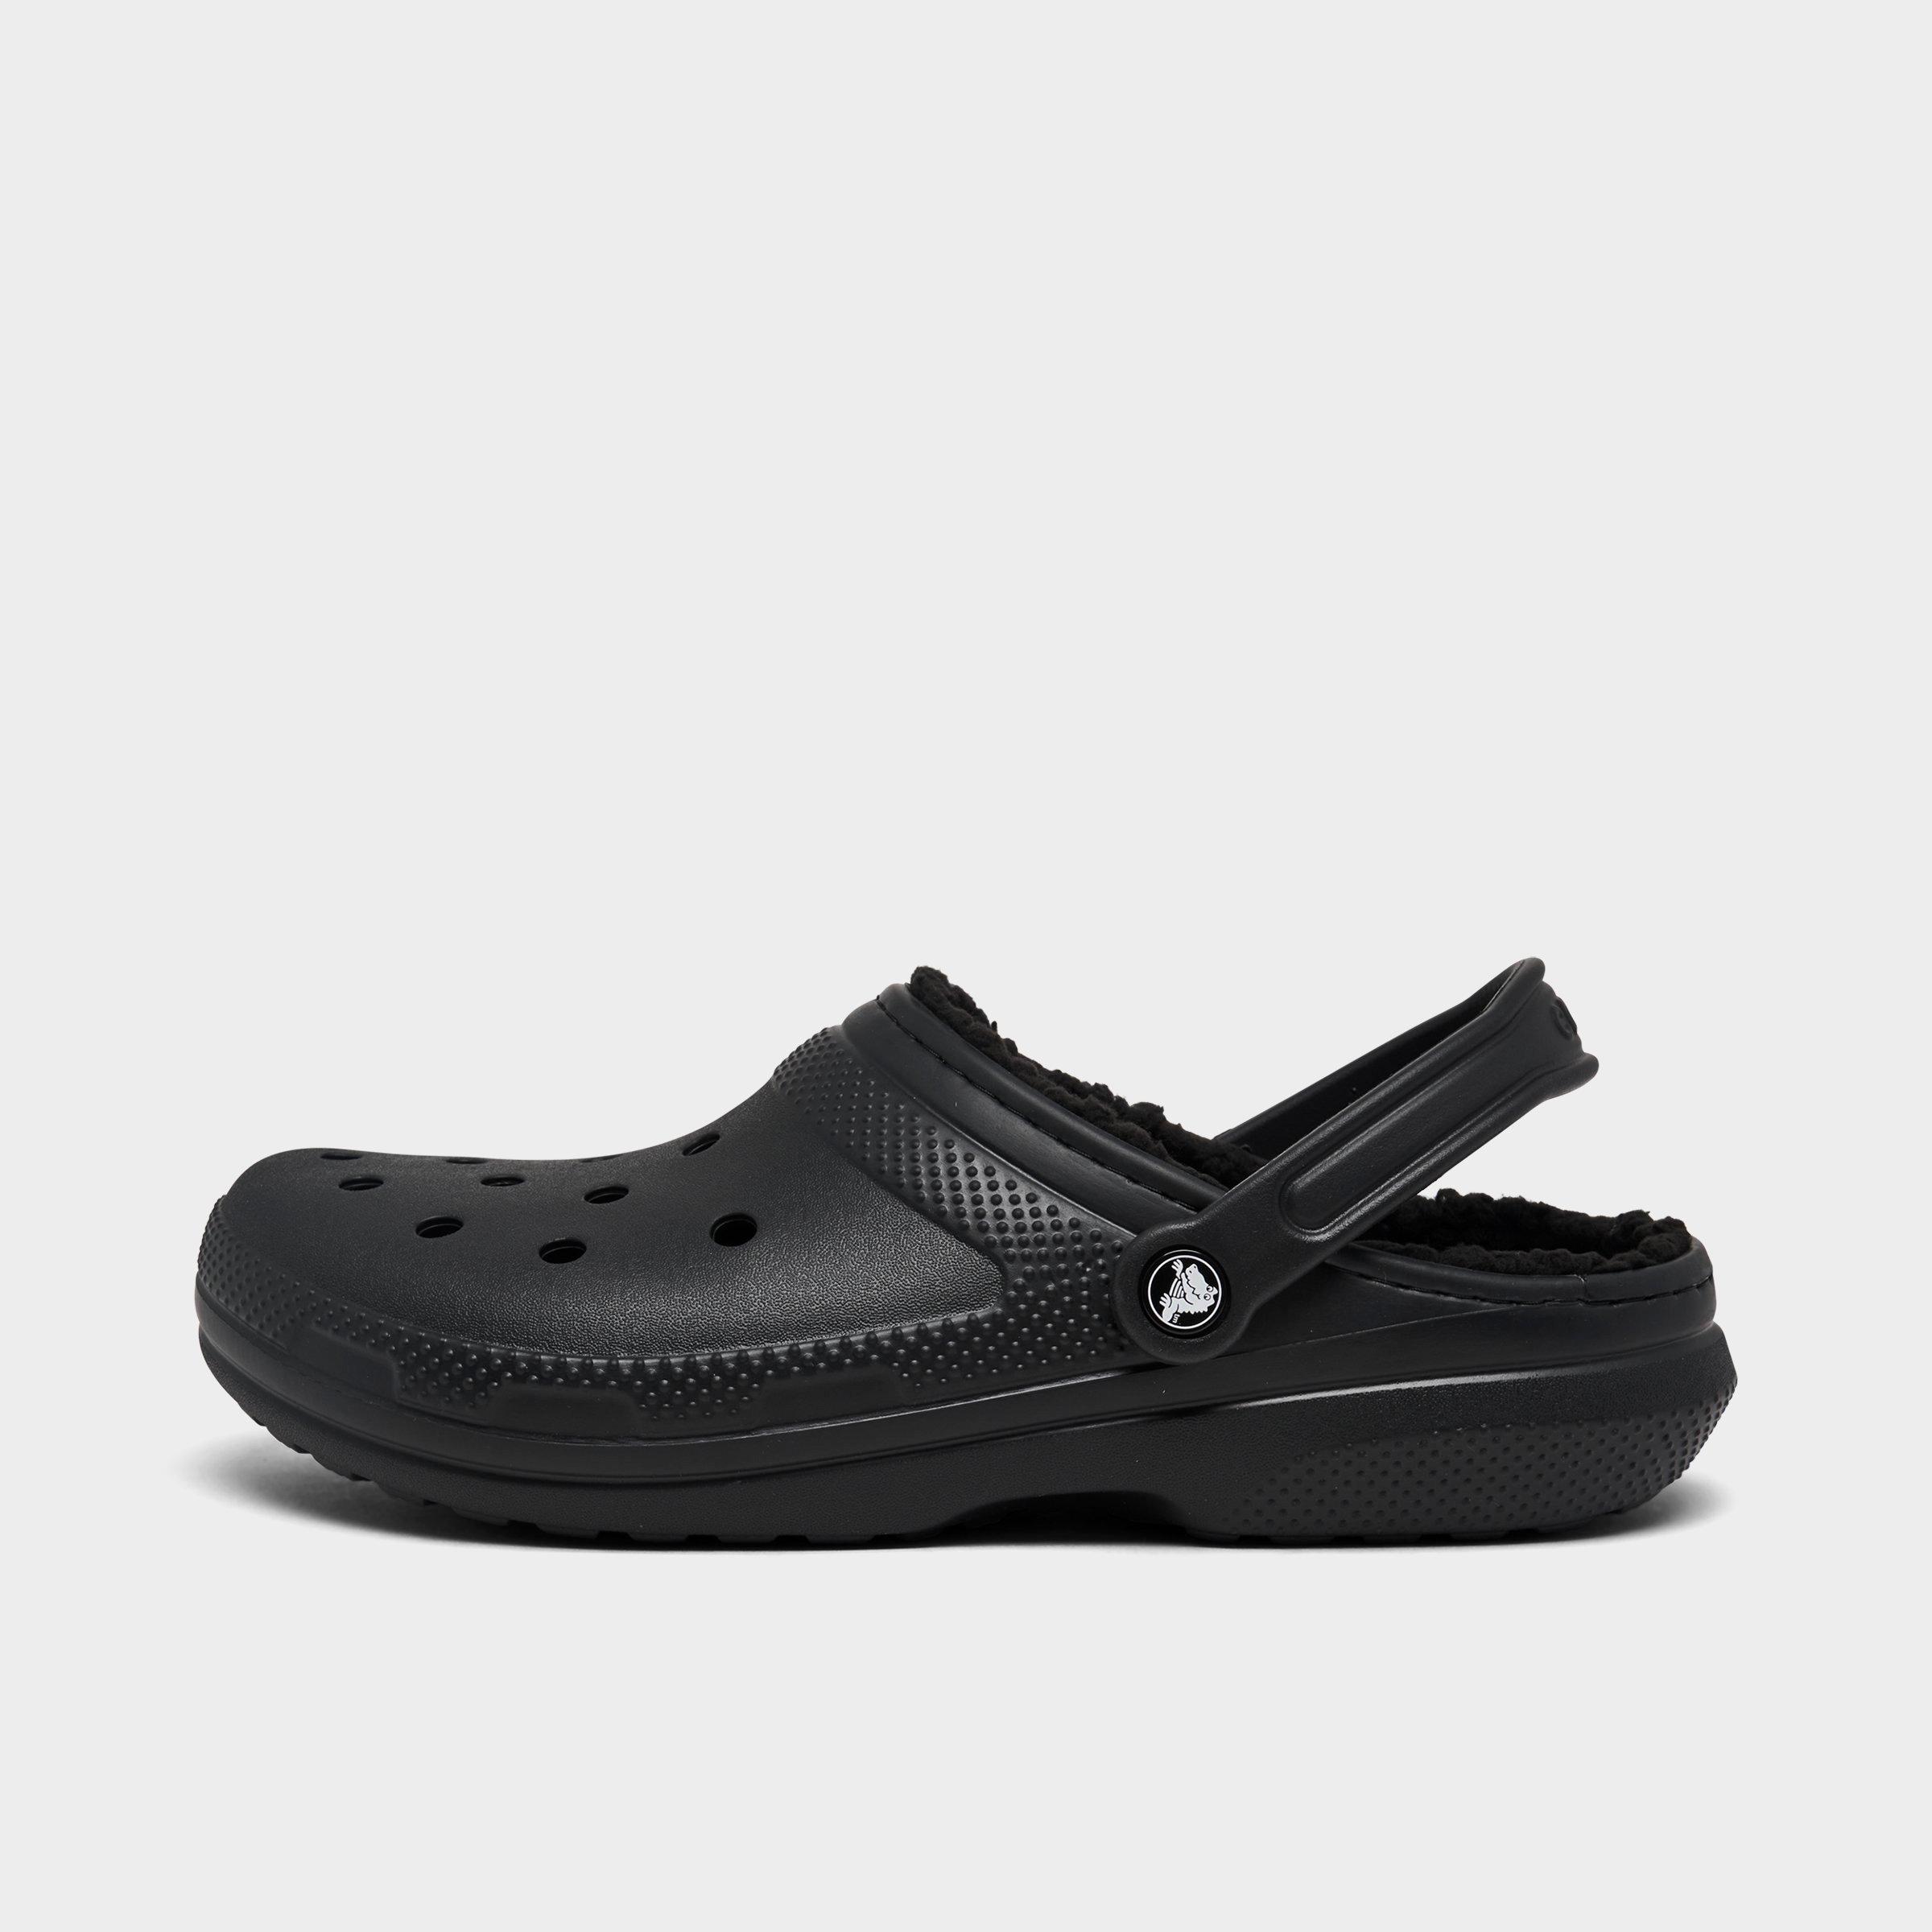 crocs with lining on sale